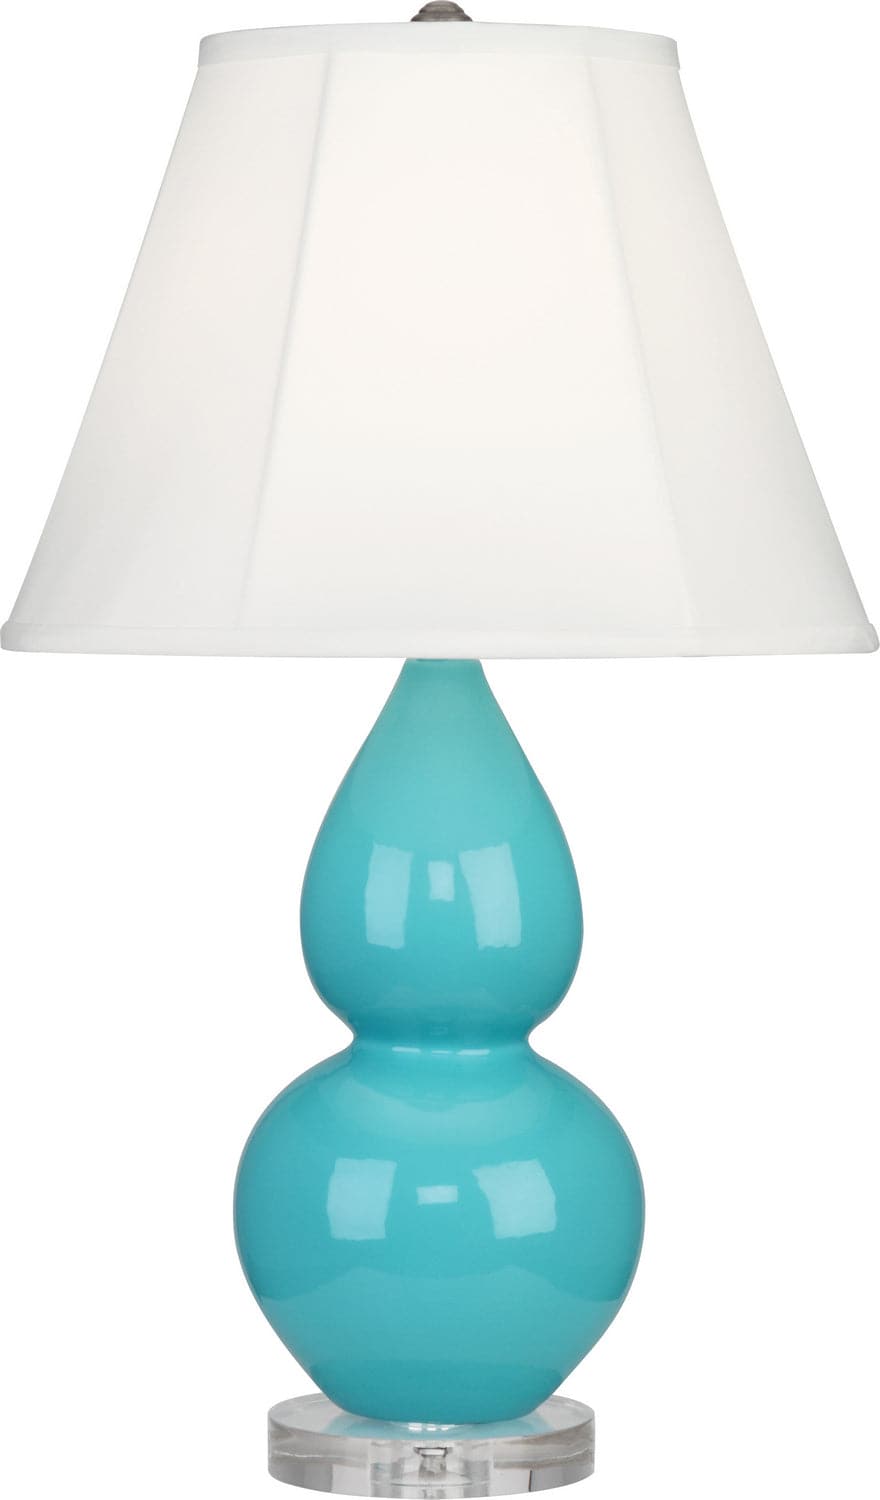 Robert Abbey - A761 - One Light Accent Lamp - Small Double Gourd - Egg Blue Glazed w/Lucite Base